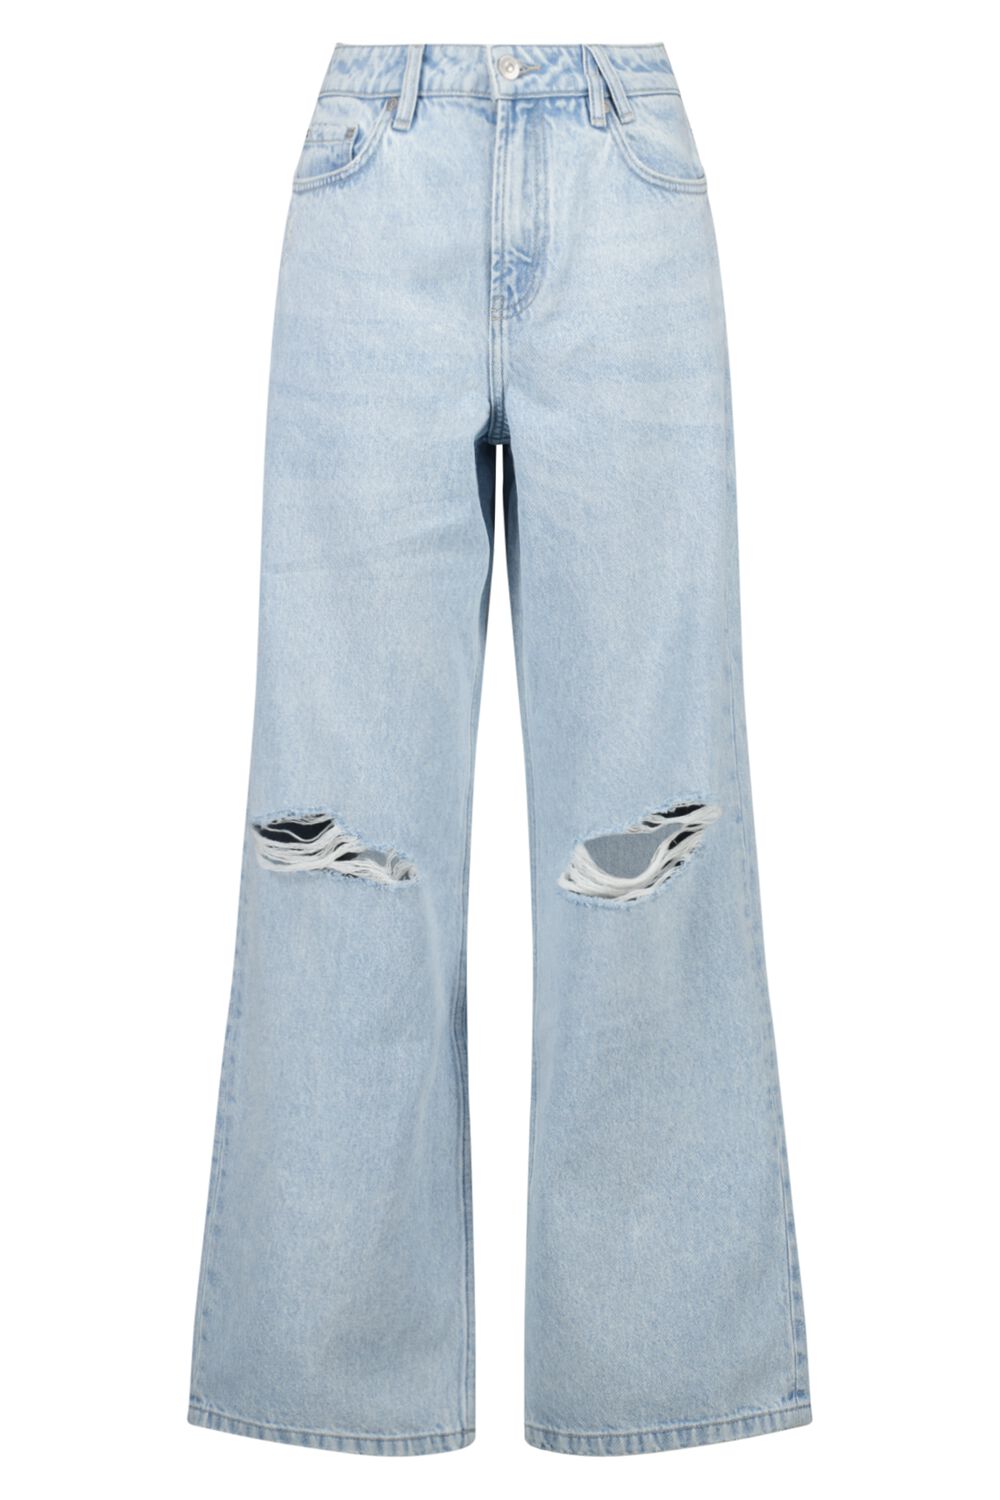 America Today Dames Jeans Madison Blauw product